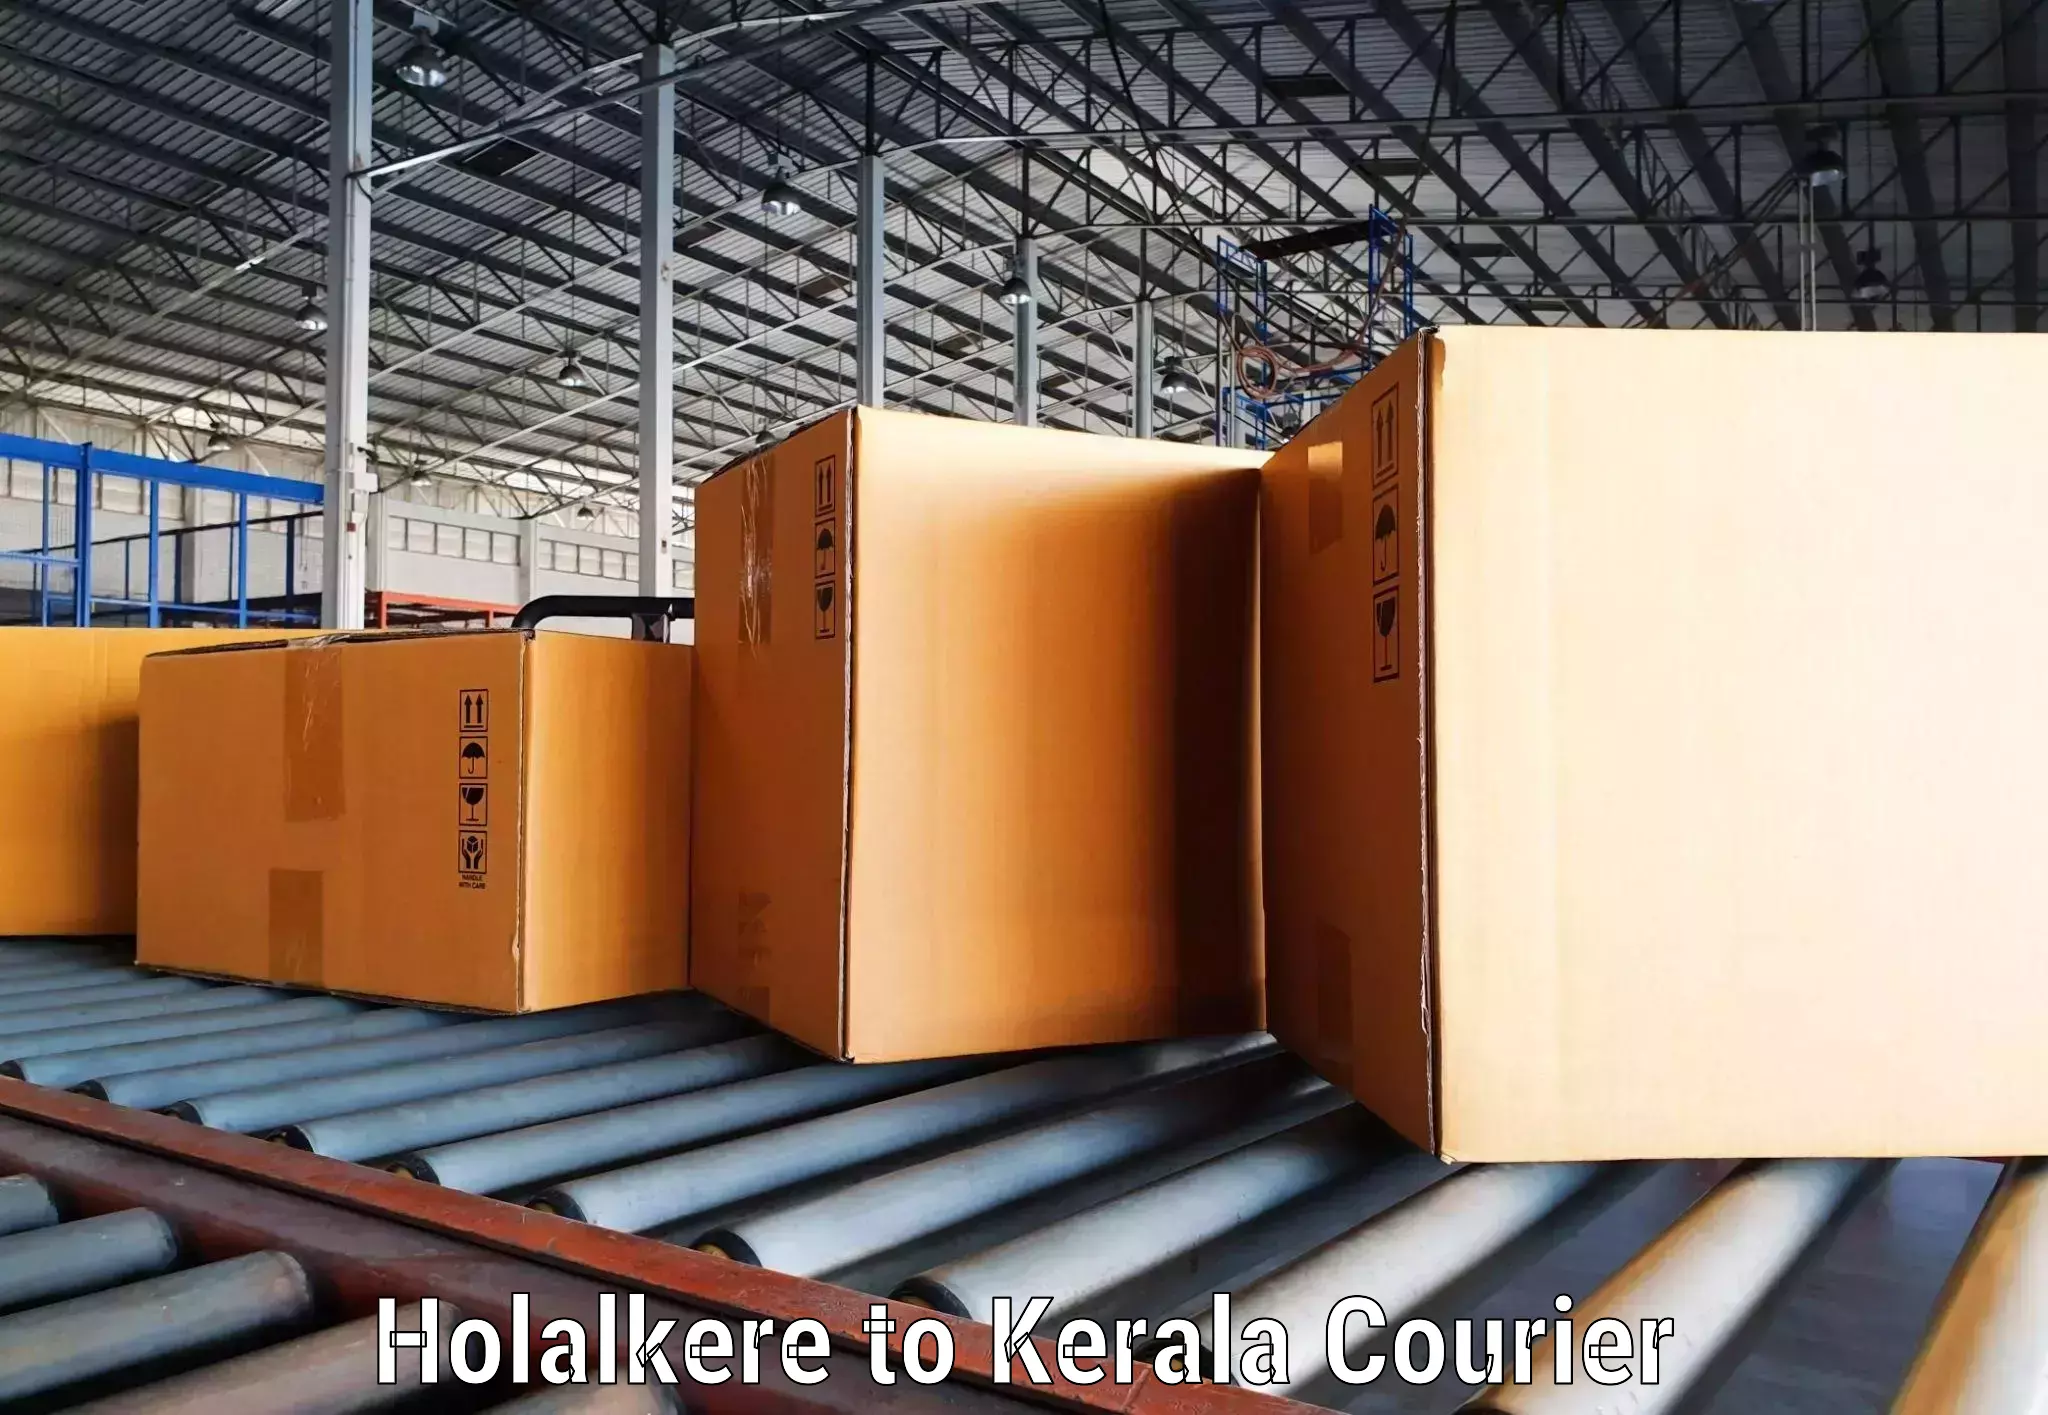 Multi-carrier shipping in Holalkere to Trivandrum